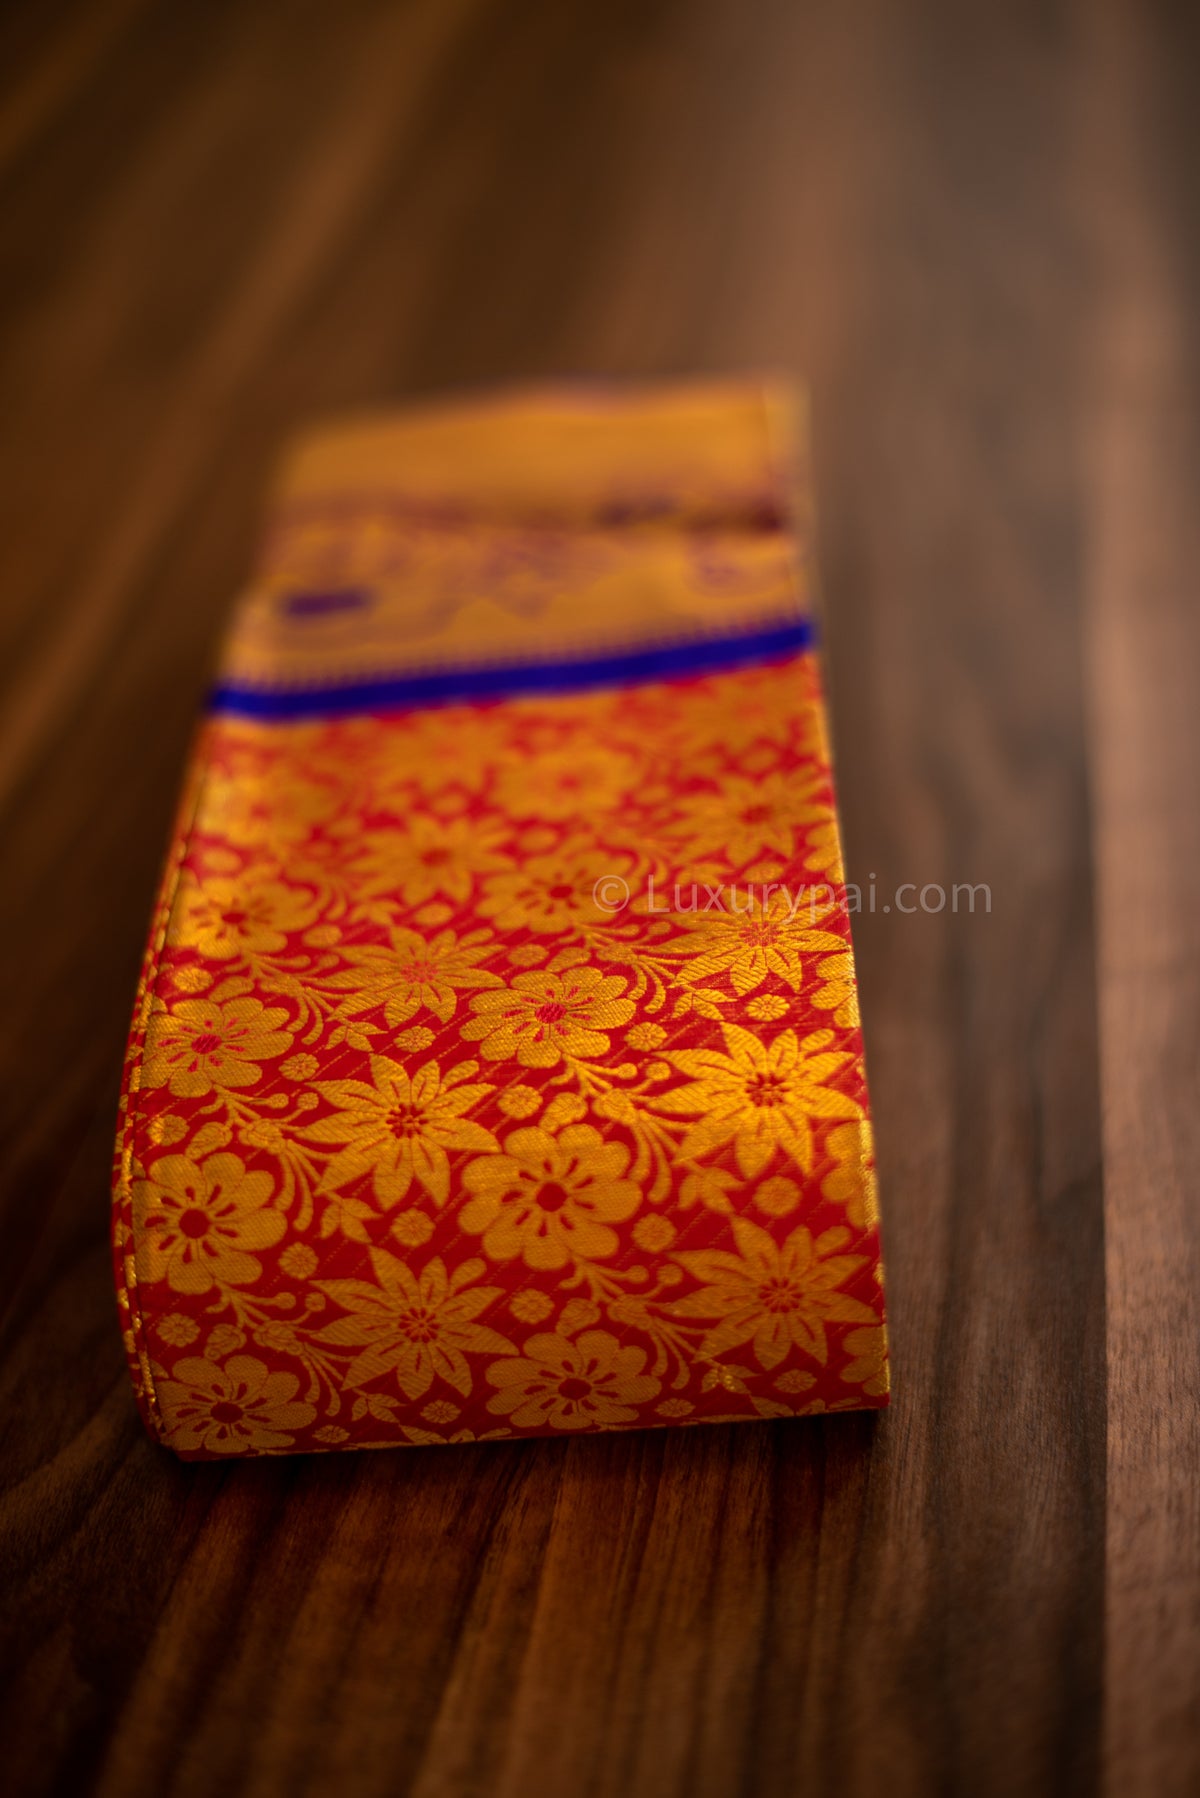 Gorgeous Tomato Red Kanchipuram Pattu Saree with Floral Design - A Must-Have for Any Bride or Woman Looking for a Luxurious and Elegant Piece